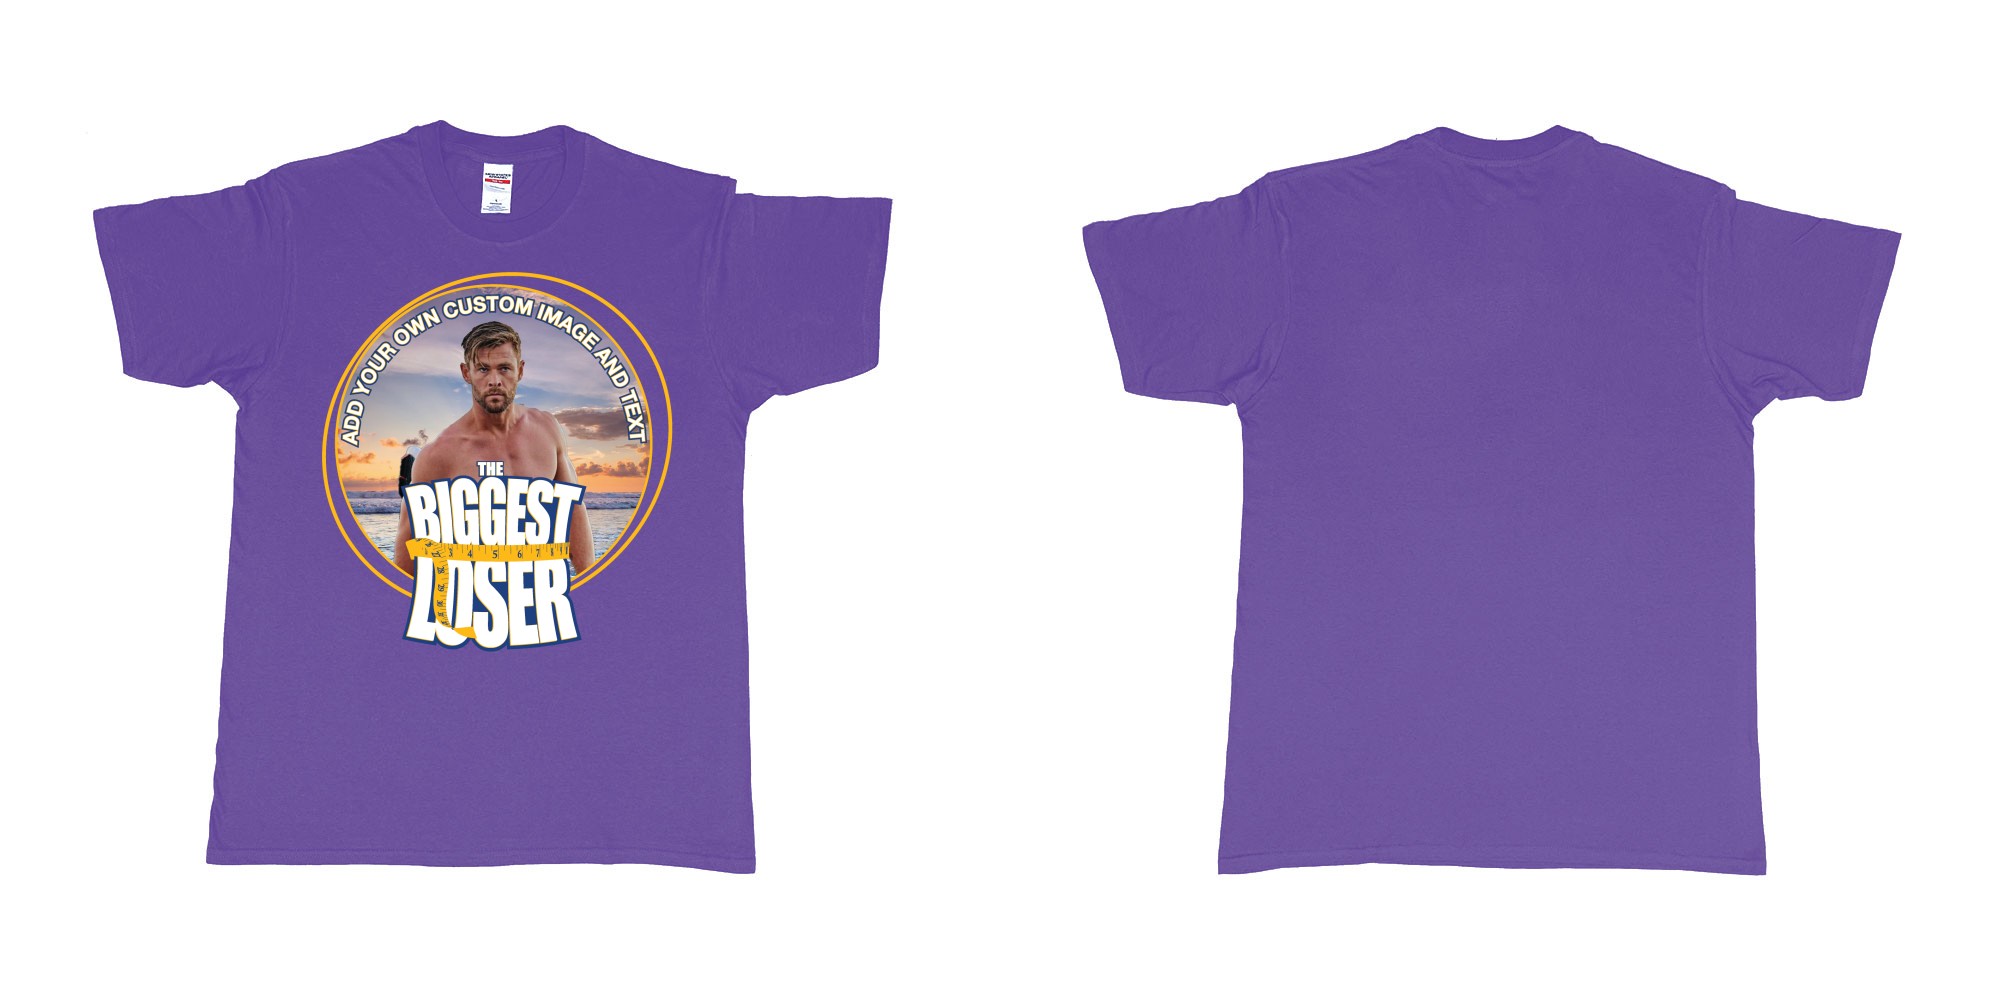 Custom tshirt design the biggest loser logo custom image funny tshirt design in fabric color purple choice your own text made in Bali by The Pirate Way